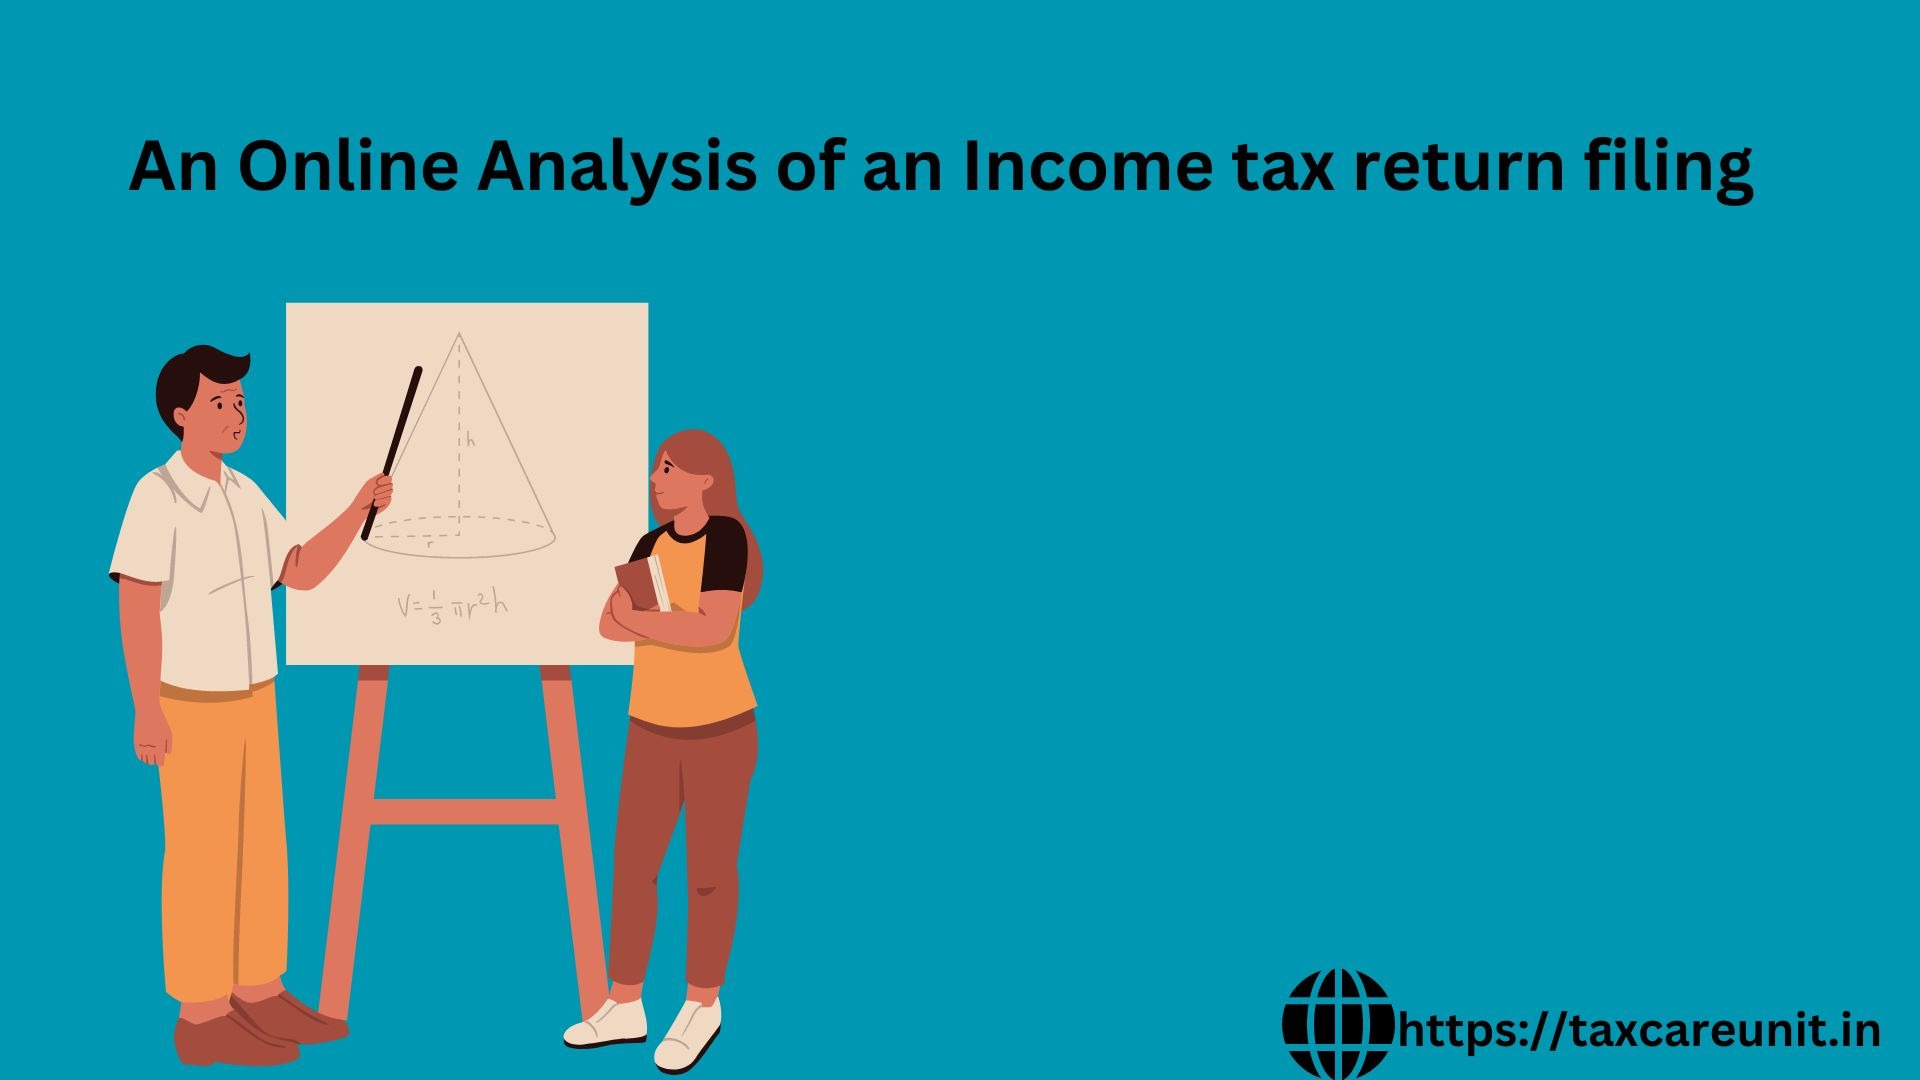 An Online Analysis of an Income tax return filing